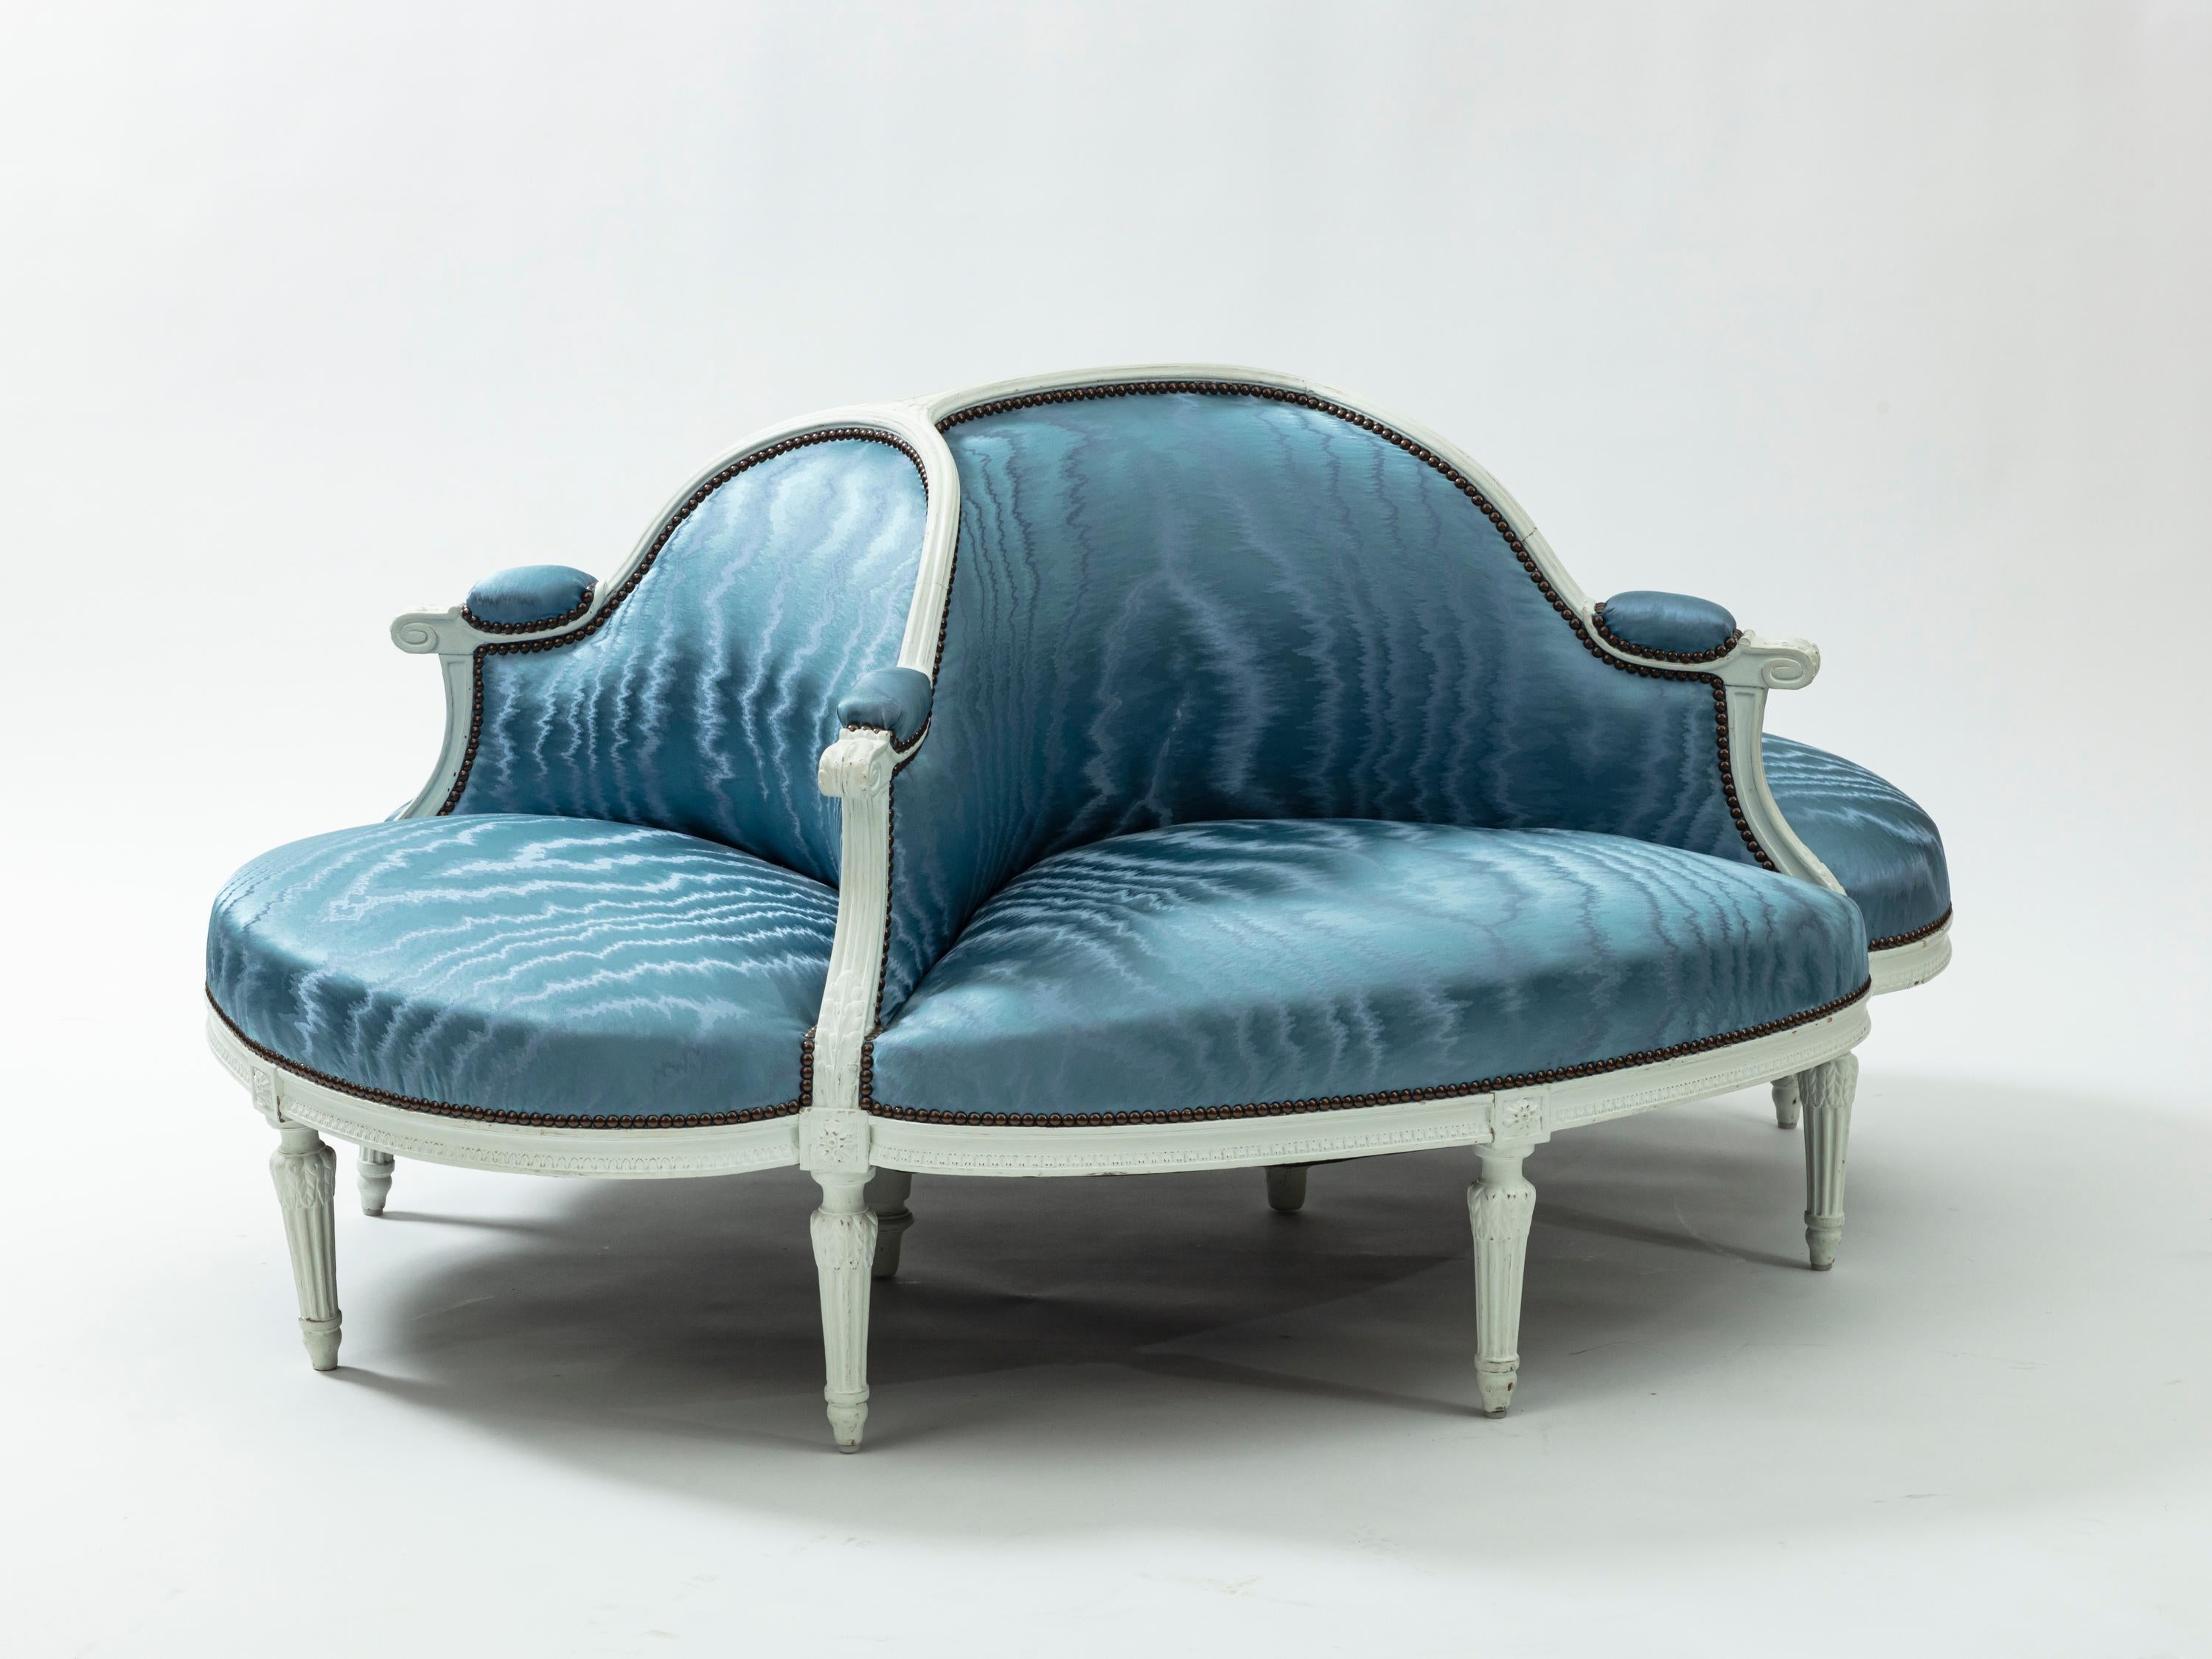 A central seat, also called “borne” from the Napoleon III period, circa 1860. Painted white wood frame, upholstered with 